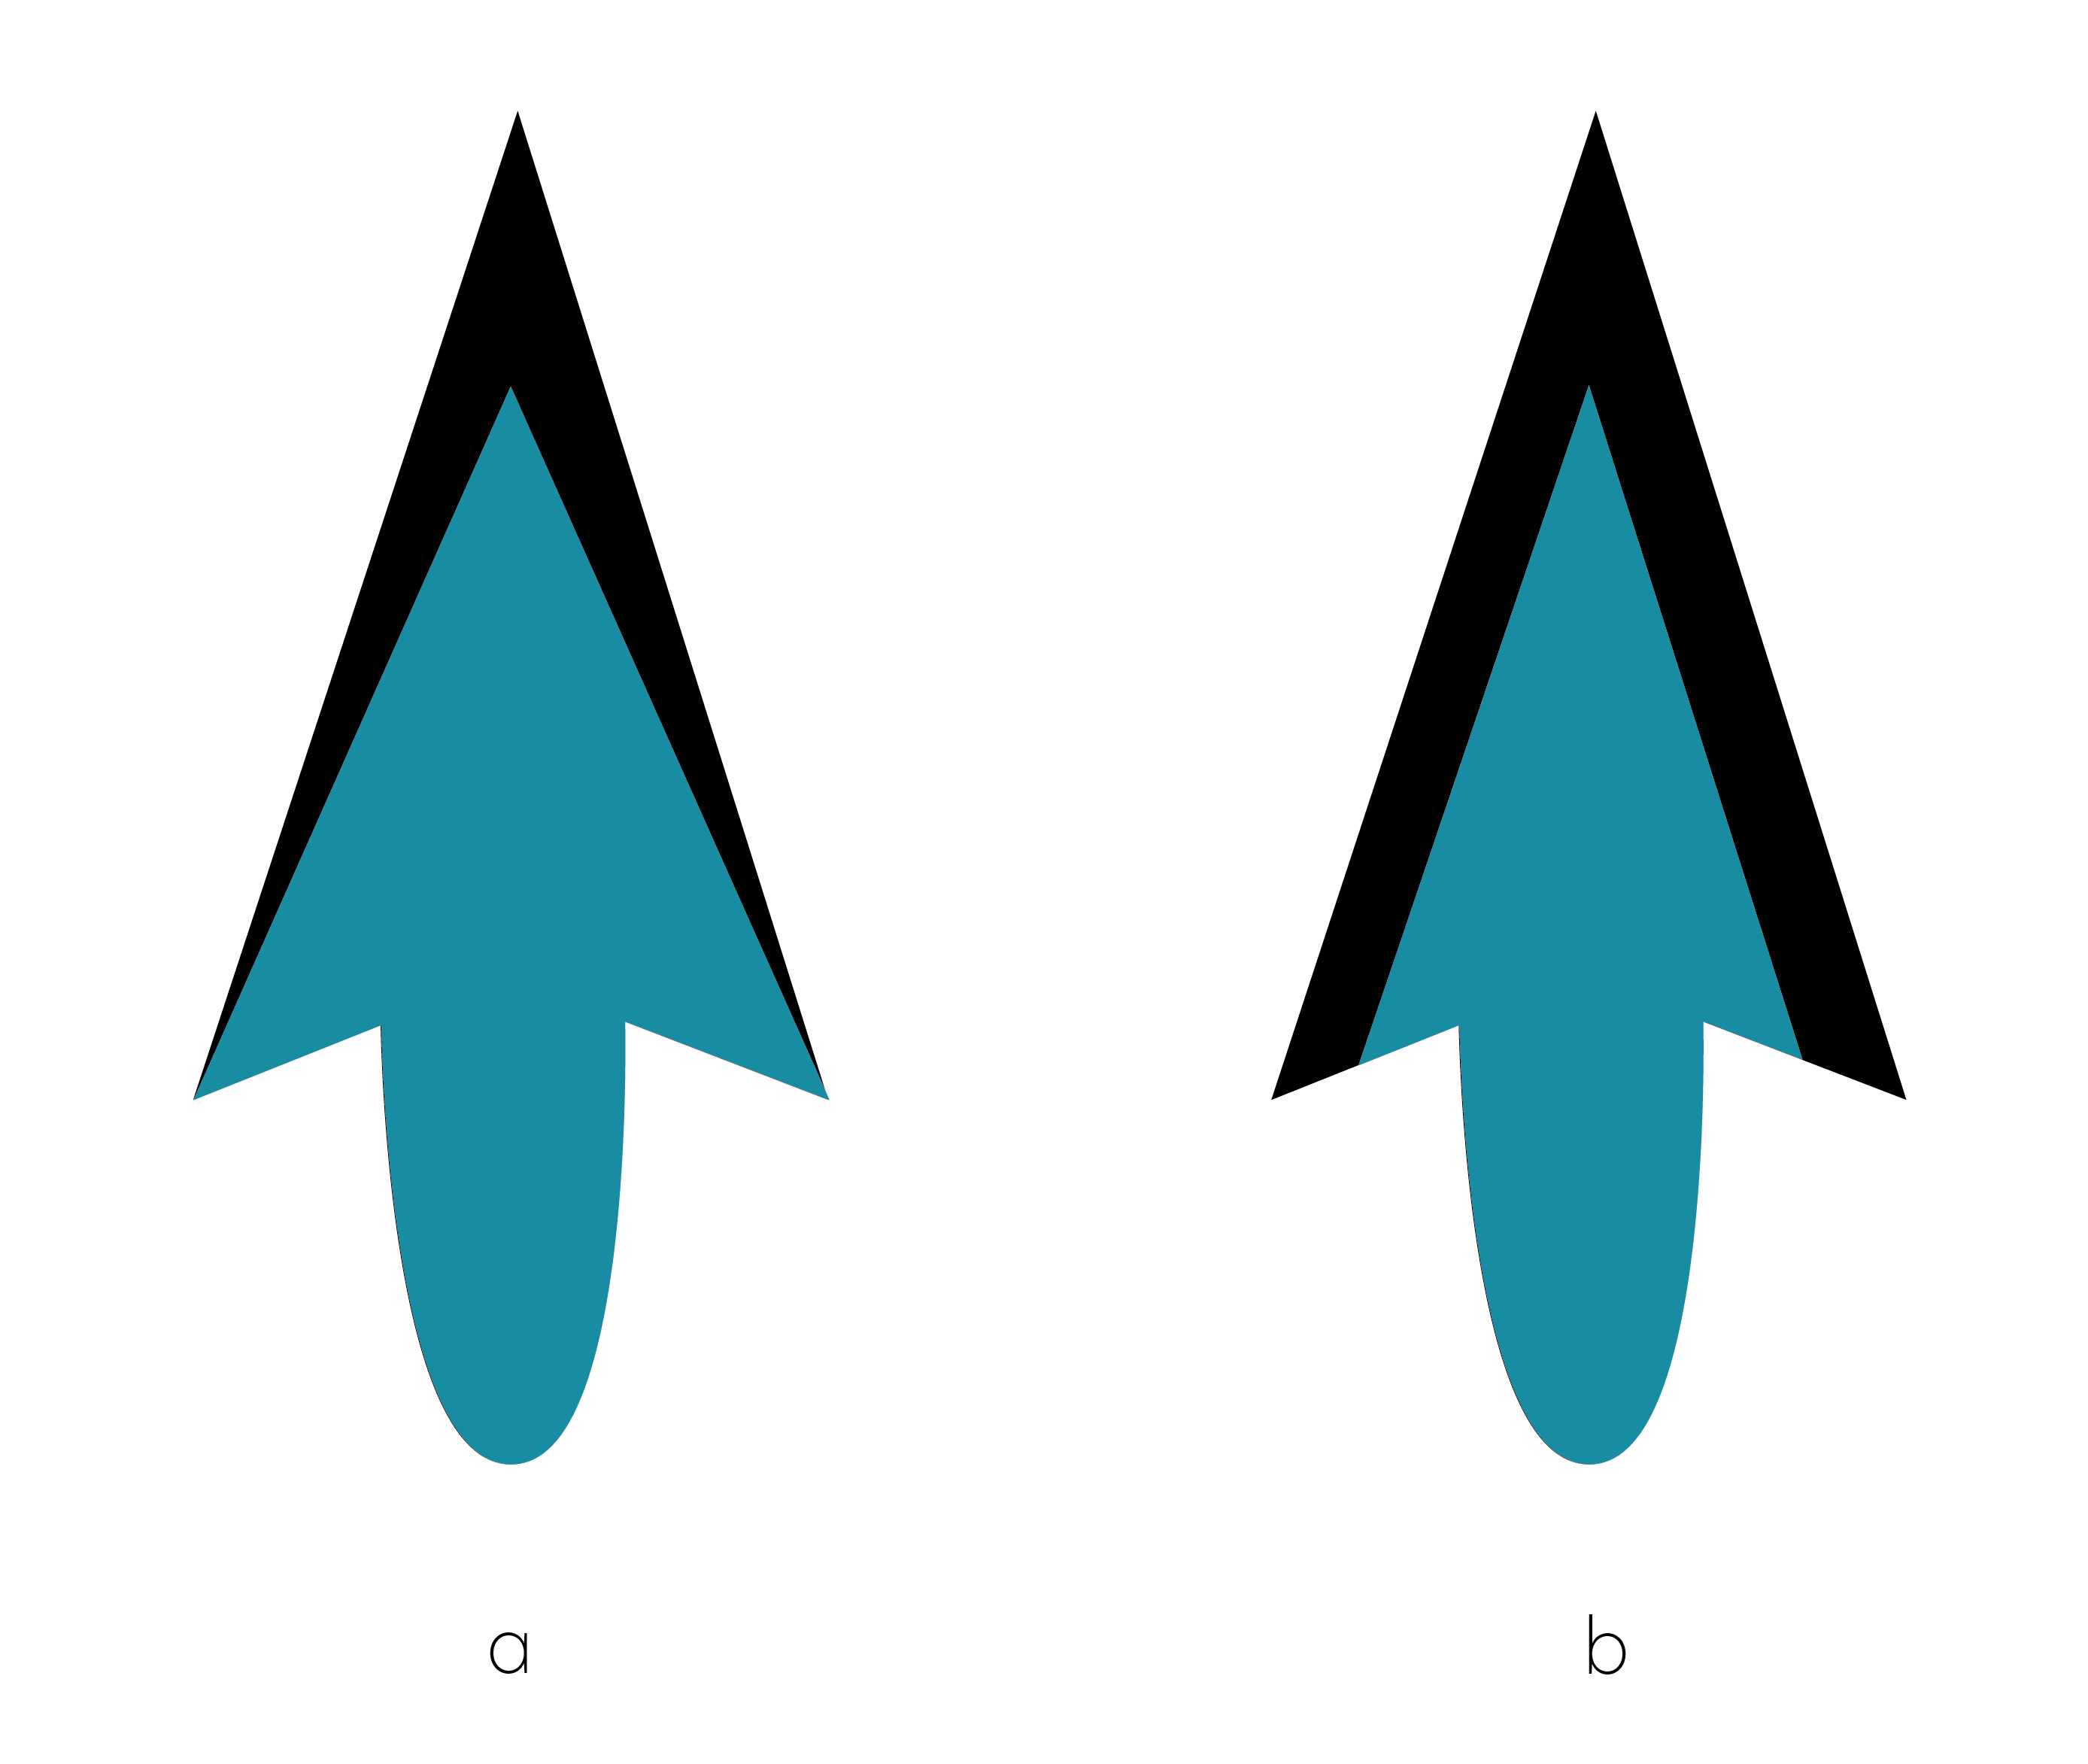 Conceptual rendering of differences found to occur between Perdiz arrow point resharpening trajectories in the a, northern;  and b, southern behavioural regions. In both cases, attributes associated with hafting---`maximum stem length` and `stem width`---are morphologically stable. However, differential approaches to resharpening and/or retouch resulted in distinct shape differences in Perdiz arrow point blades. Resharpening and/or retouch efforts of Caddo knappers from the northern behavioural region was limited to `maximum blade length`, while those from the southern behavioural region were found to be more dynamic, including changes in `maximum blade length`, `width`, and `shoulder width` that occur between `size classes`.